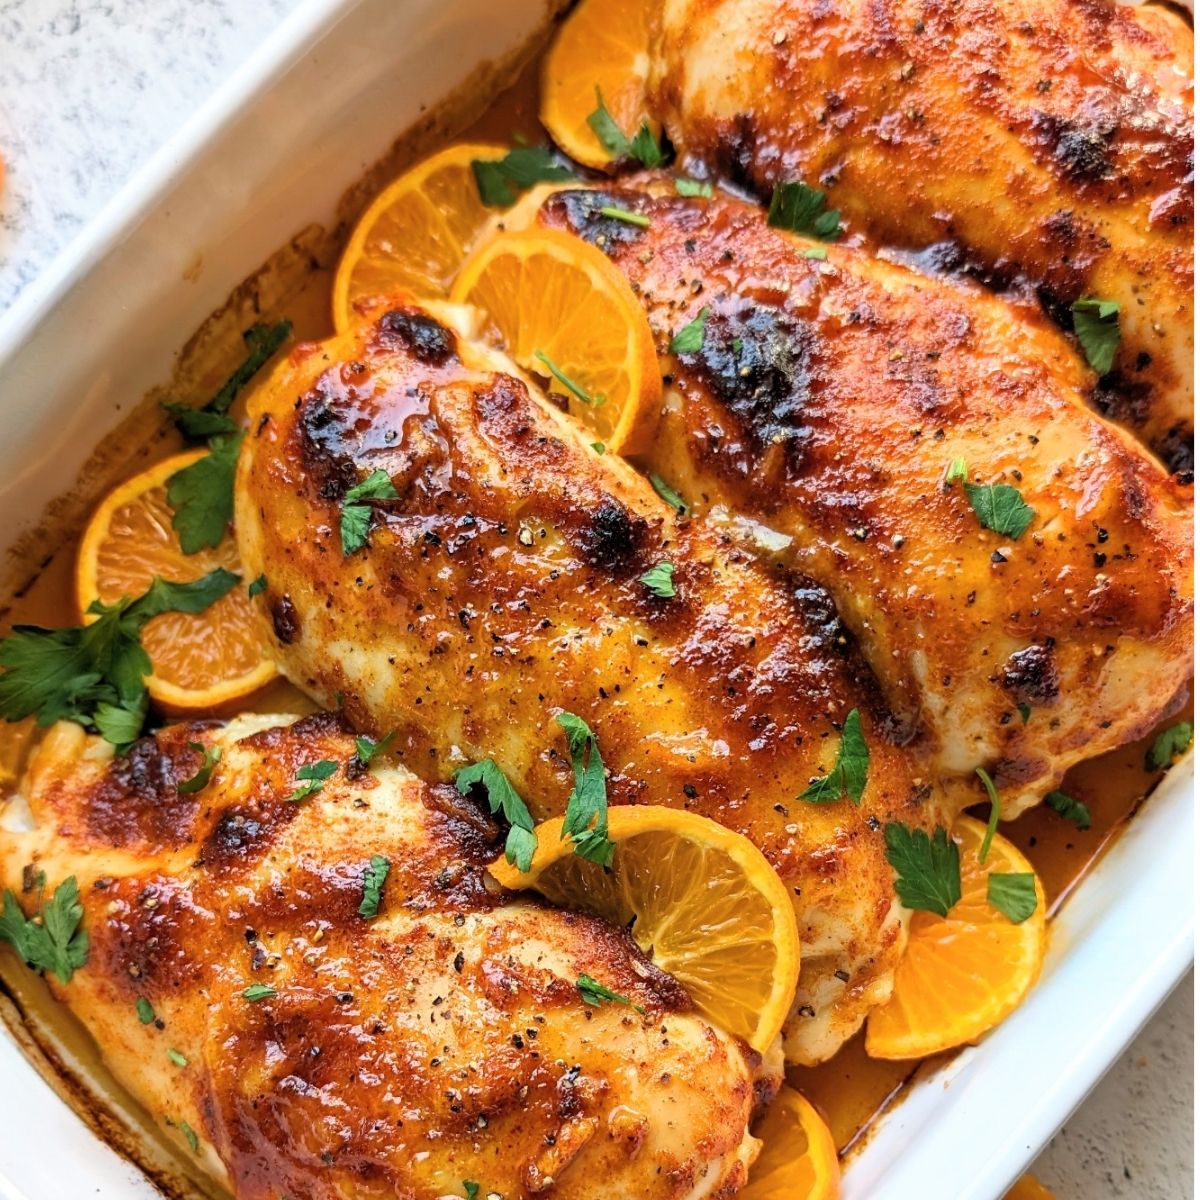 low sodium orange chicken recipe easy low sodium chicken breast recipes with oranges fresh herbs and salt free spices